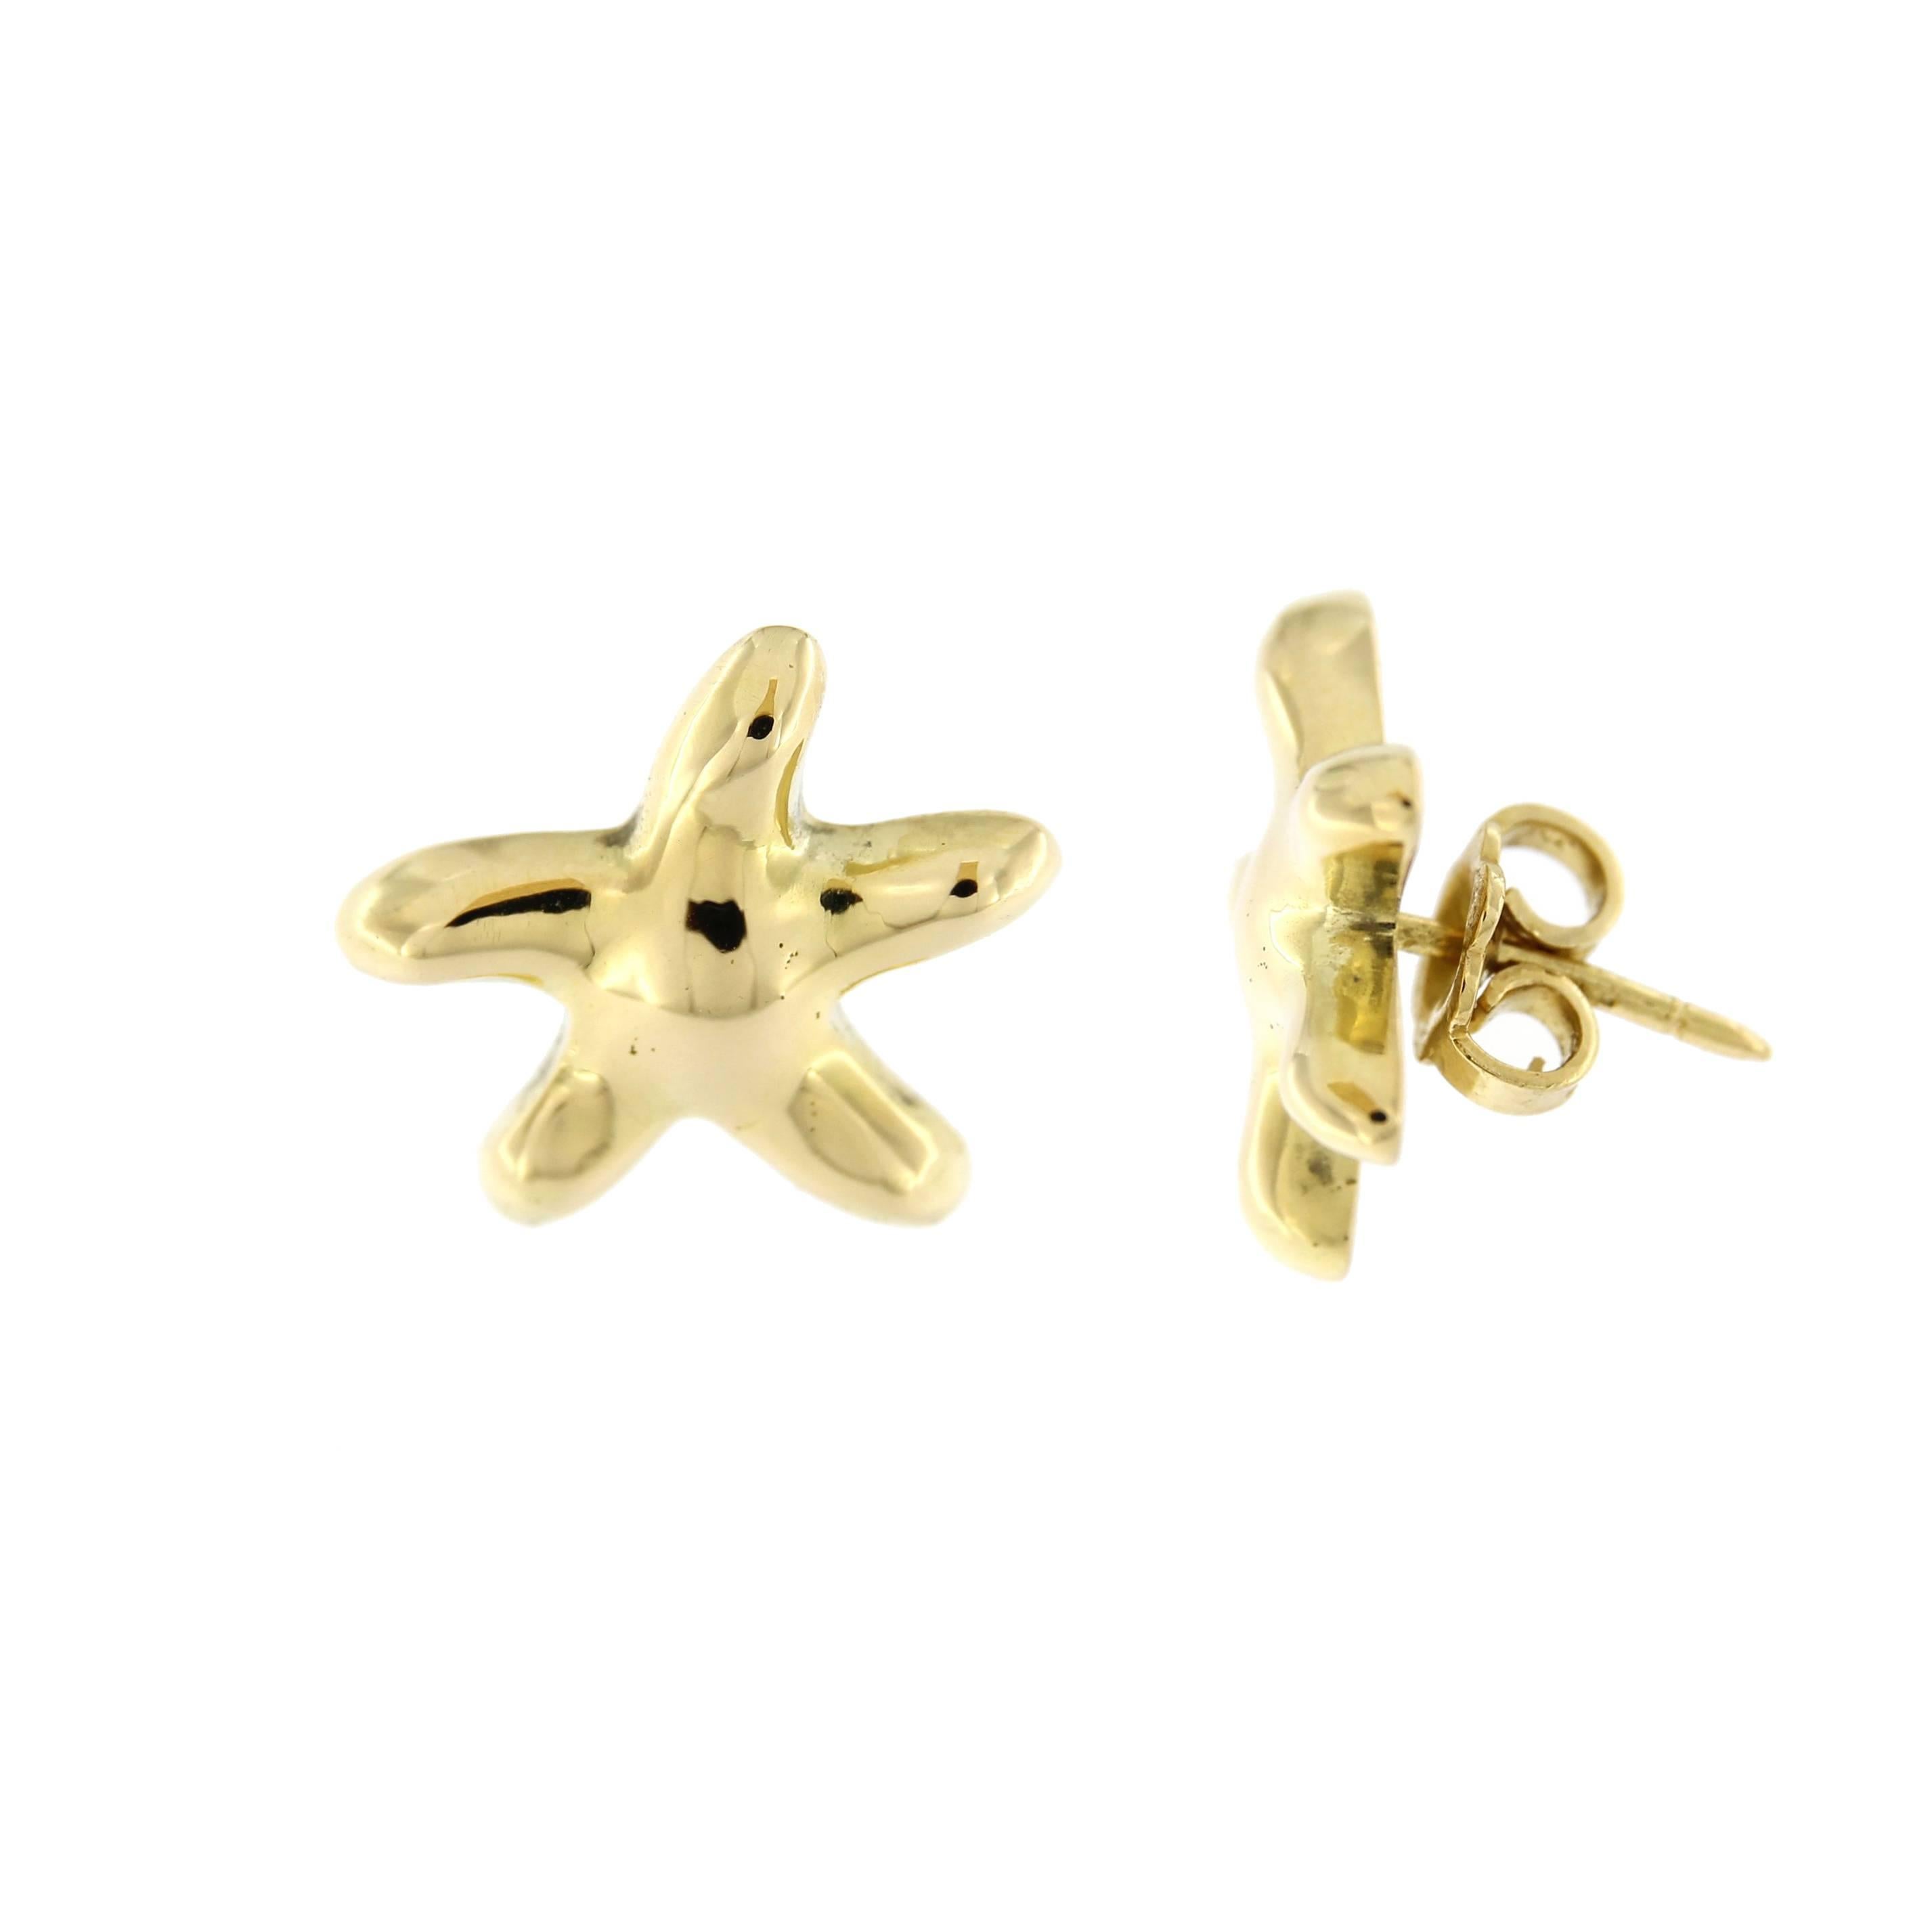 Jona design collection, hand crafted in Italy, 18 karat yellow gold starfish stud earrings.  
All Jona jewelry is new and has never been previously owned or worn. Each item will arrive at your door beautifully gift wrapped in Jona boxes, put inside